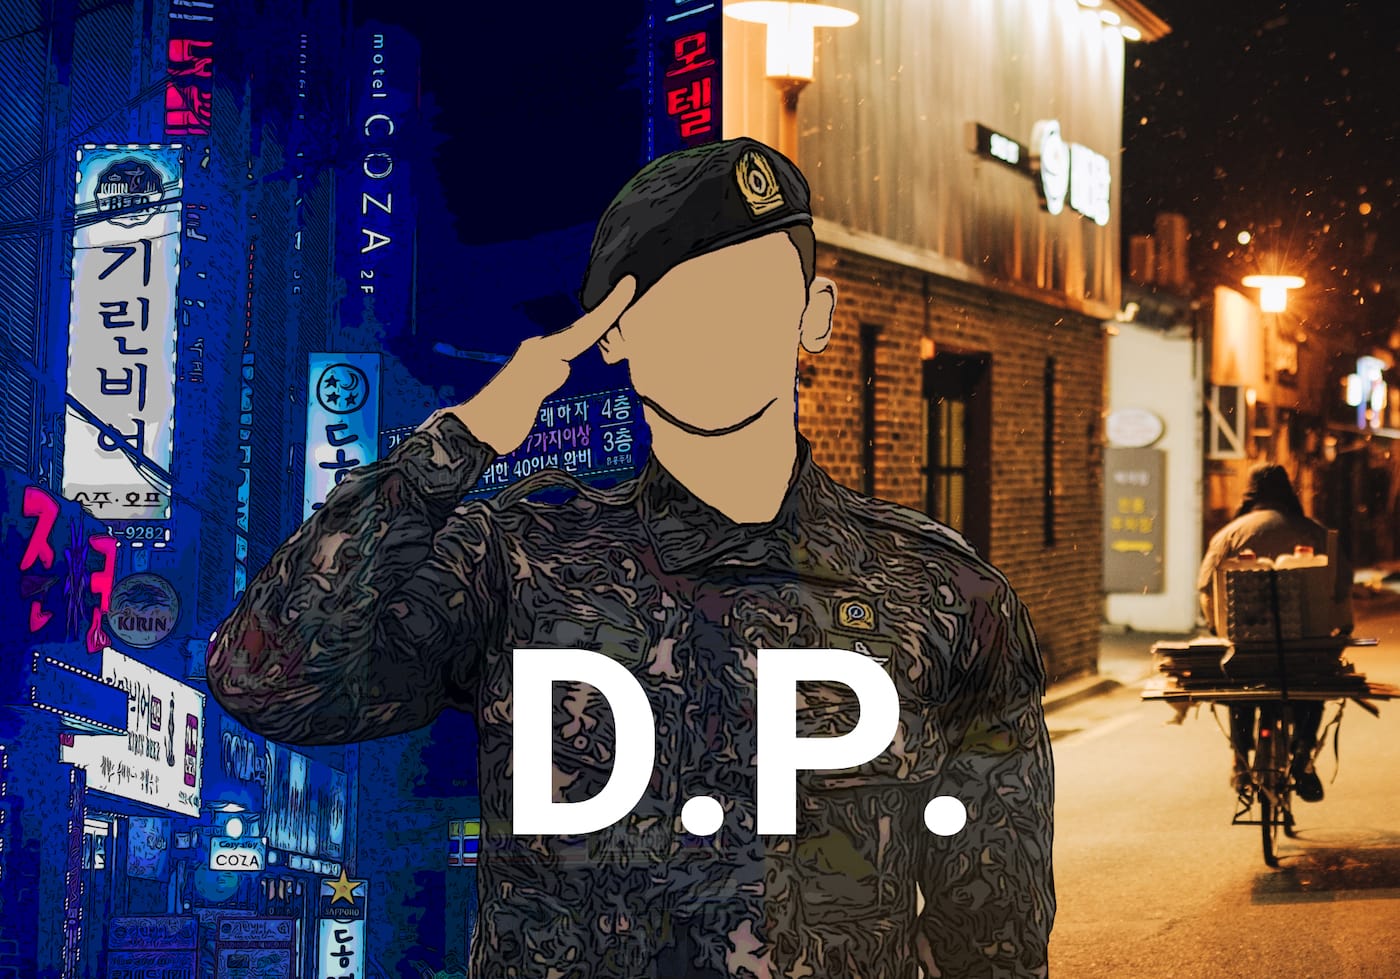 Graphic design poster showing a soldier saluting, while the backdrop shows civilian life.